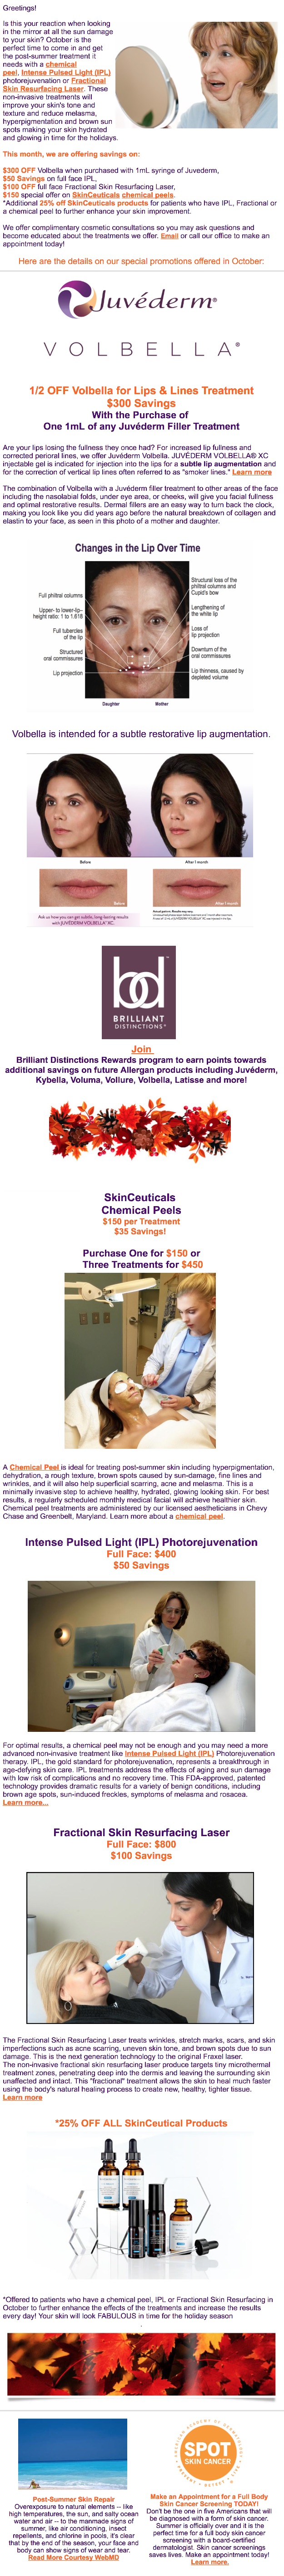 October 2017 Specials and Discounts at Chevy Chase Cosmetic Center 